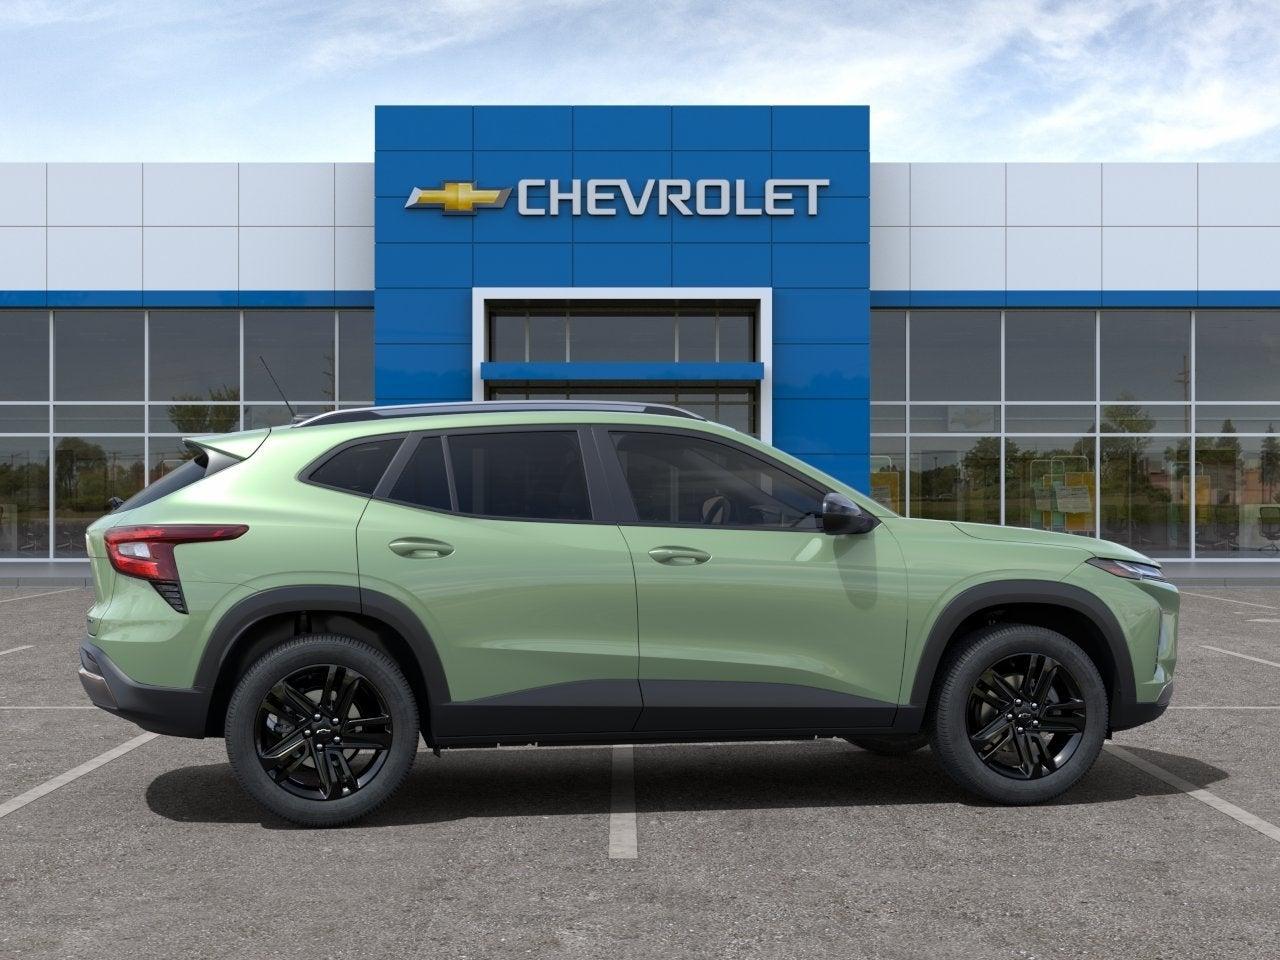 2025 Chevrolet Trax Photo in Wooster, OH 44691